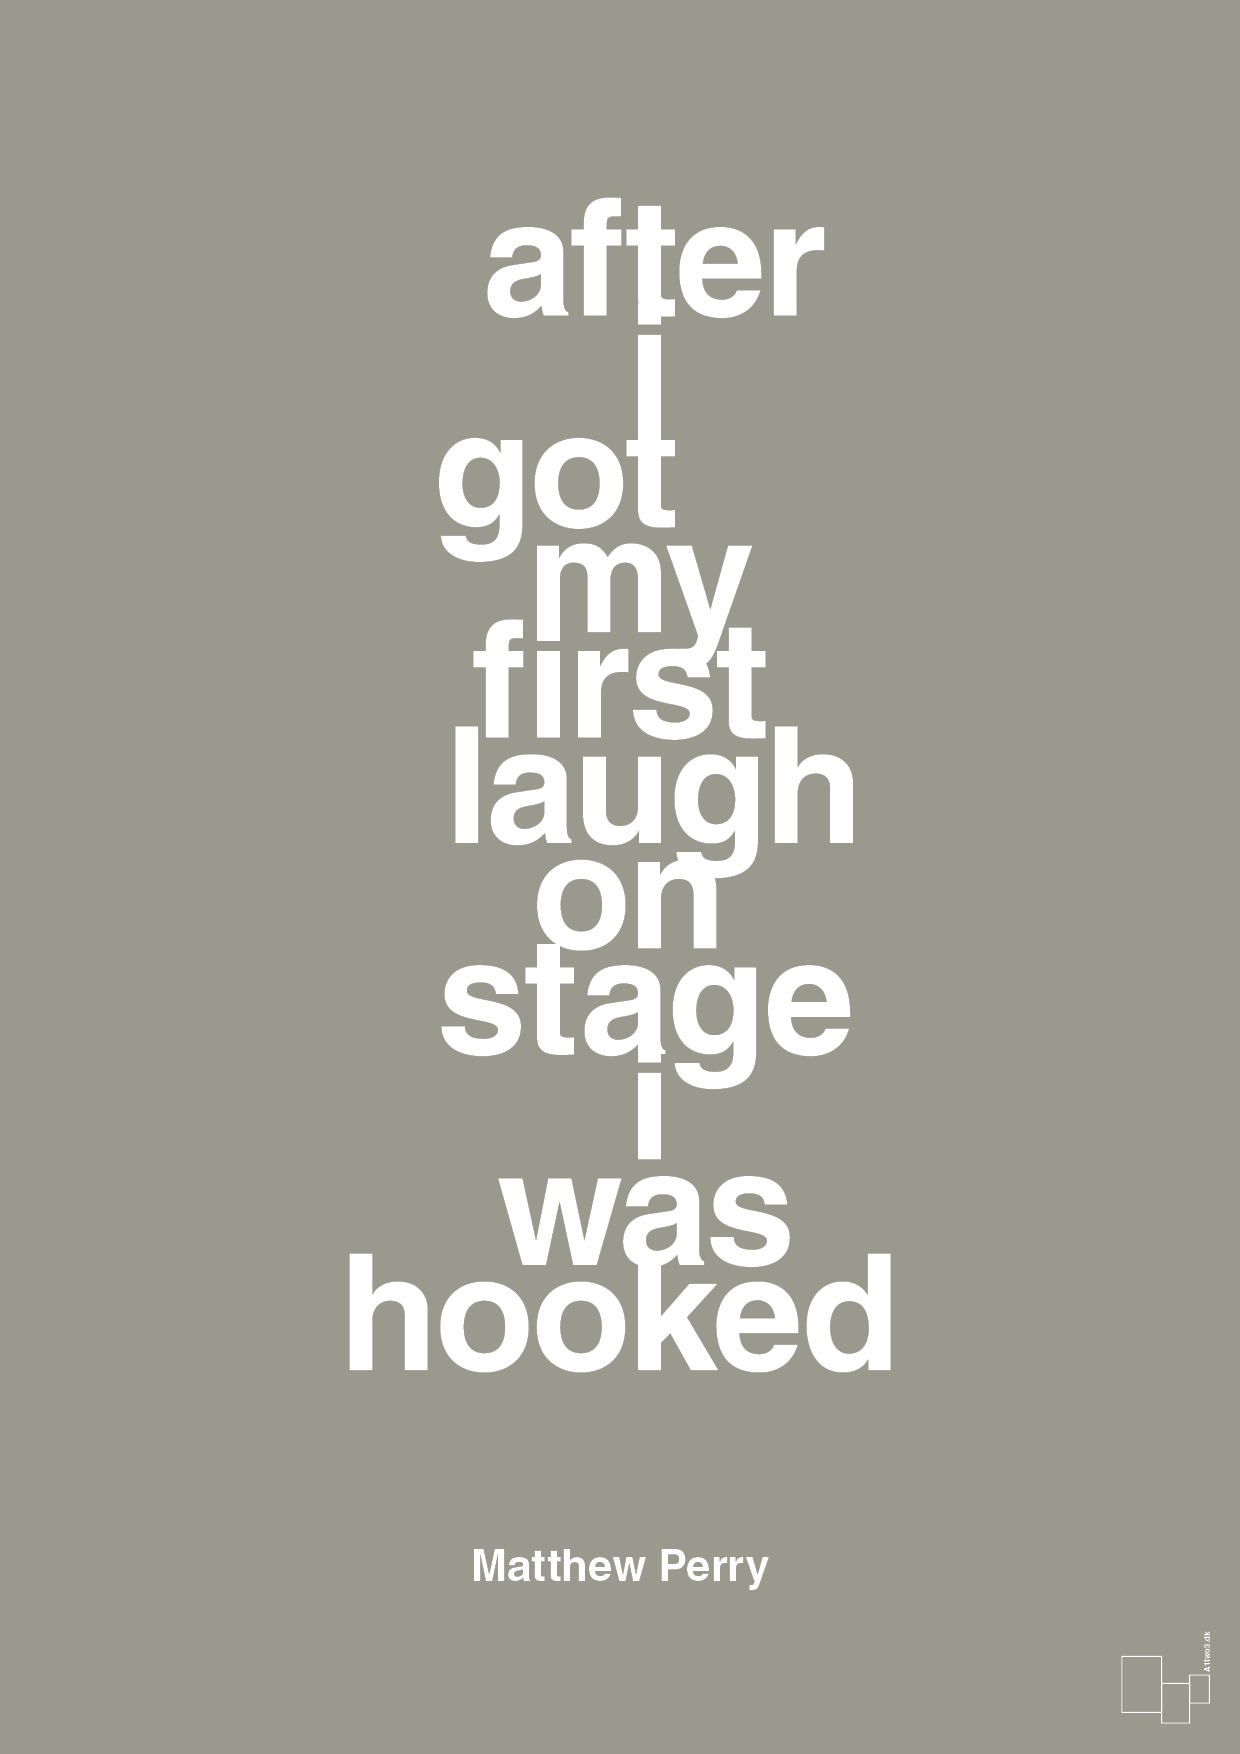 after i got my first laugh on stage i was hooked - Plakat med Citater i Battleship Gray